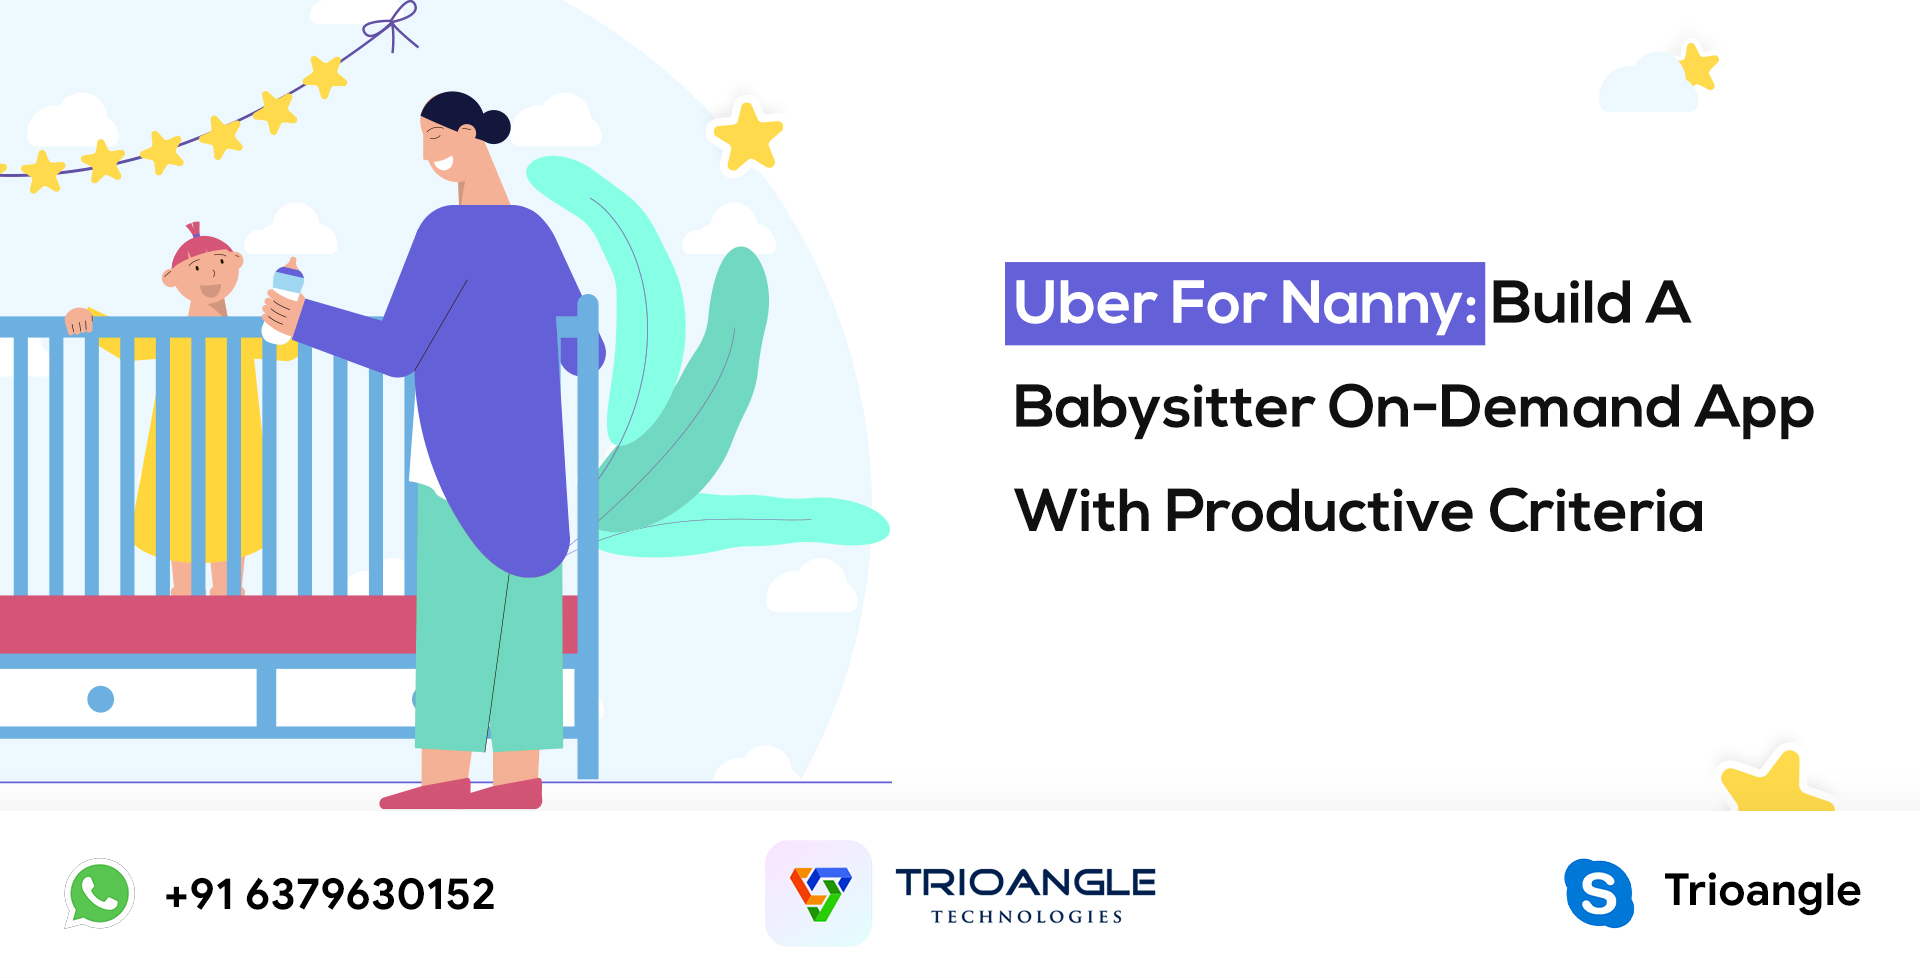 Uber For Nanny: Build A Babysitter On-Demand App With Productive Criteria